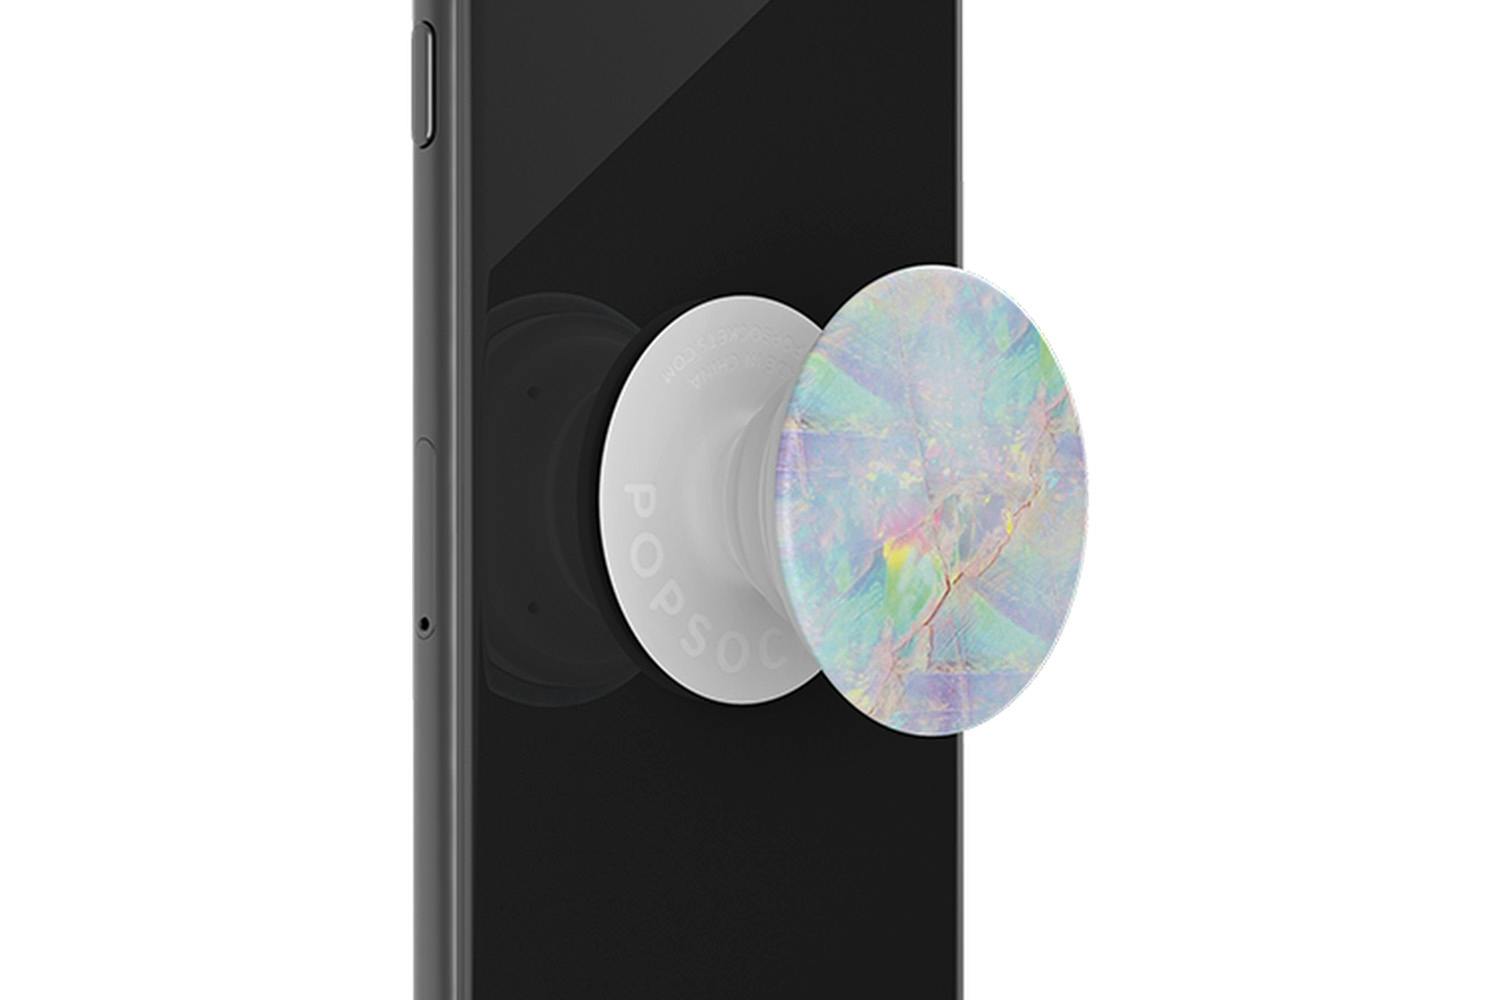 https://hniesfp.imgix.net/8/images/detailed/192/Accessories_Popsockets_800421_4.jpg?fit=fill&bg=0FFF&w=1500&h=1000&auto=format,compress